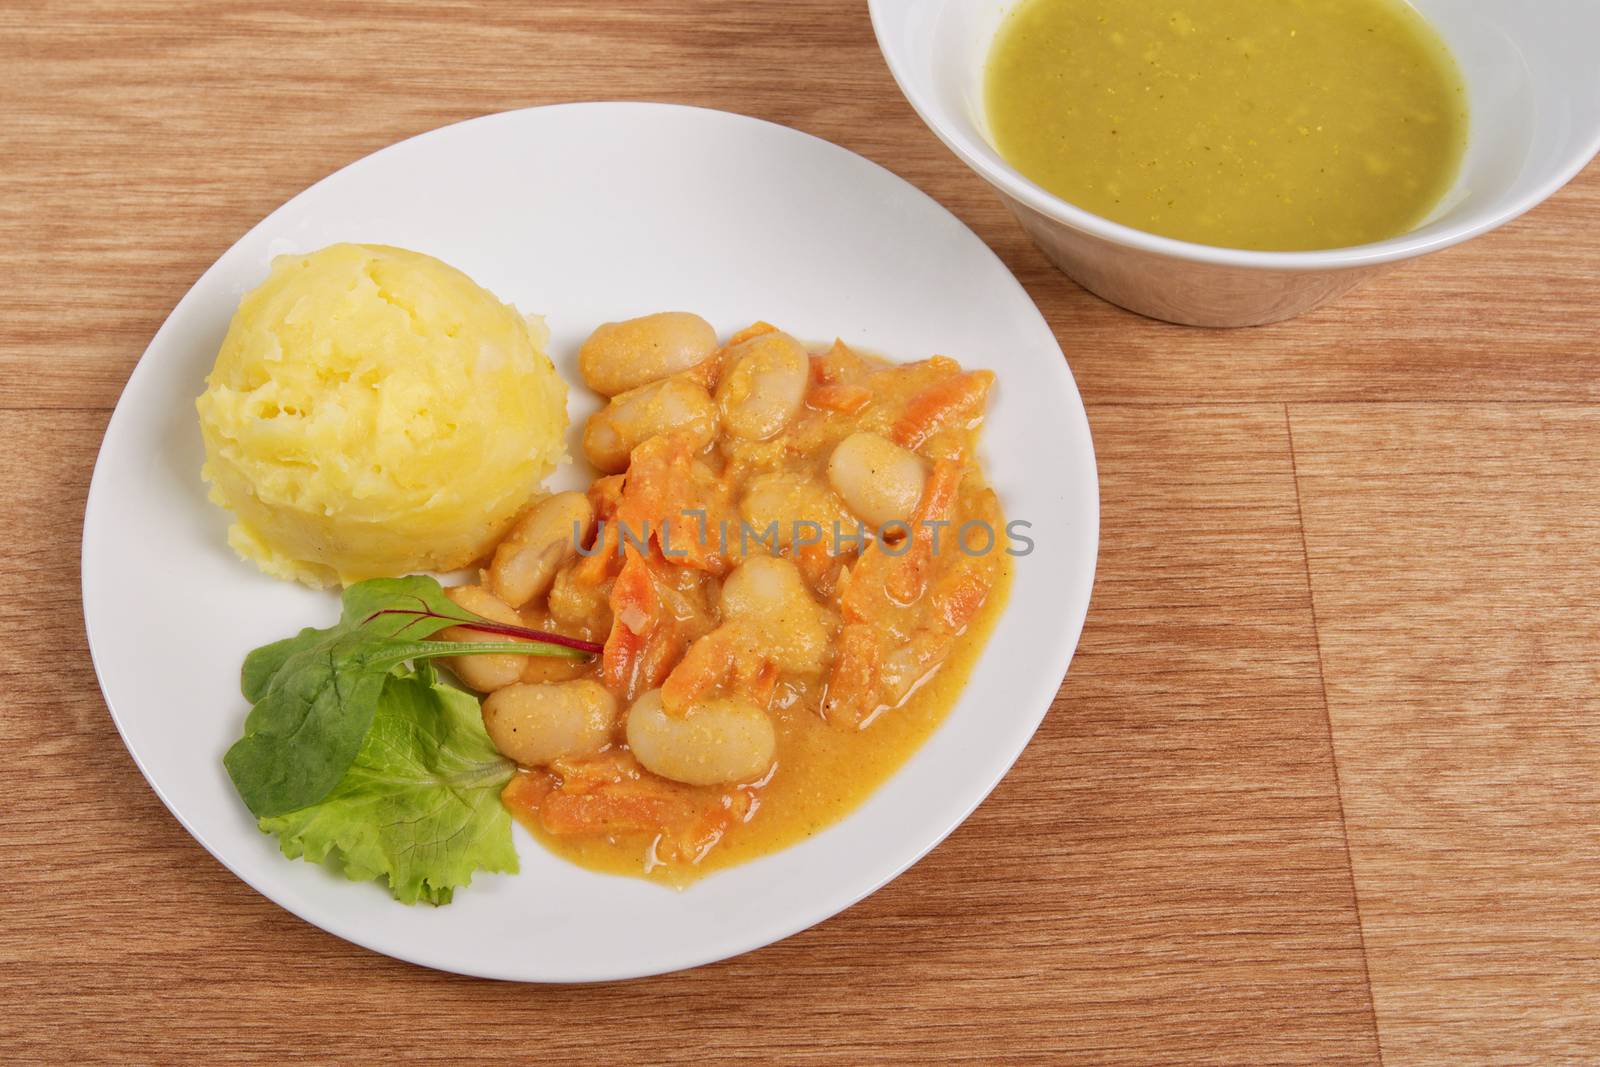 Beans with carrots and potatoes on a wooden table